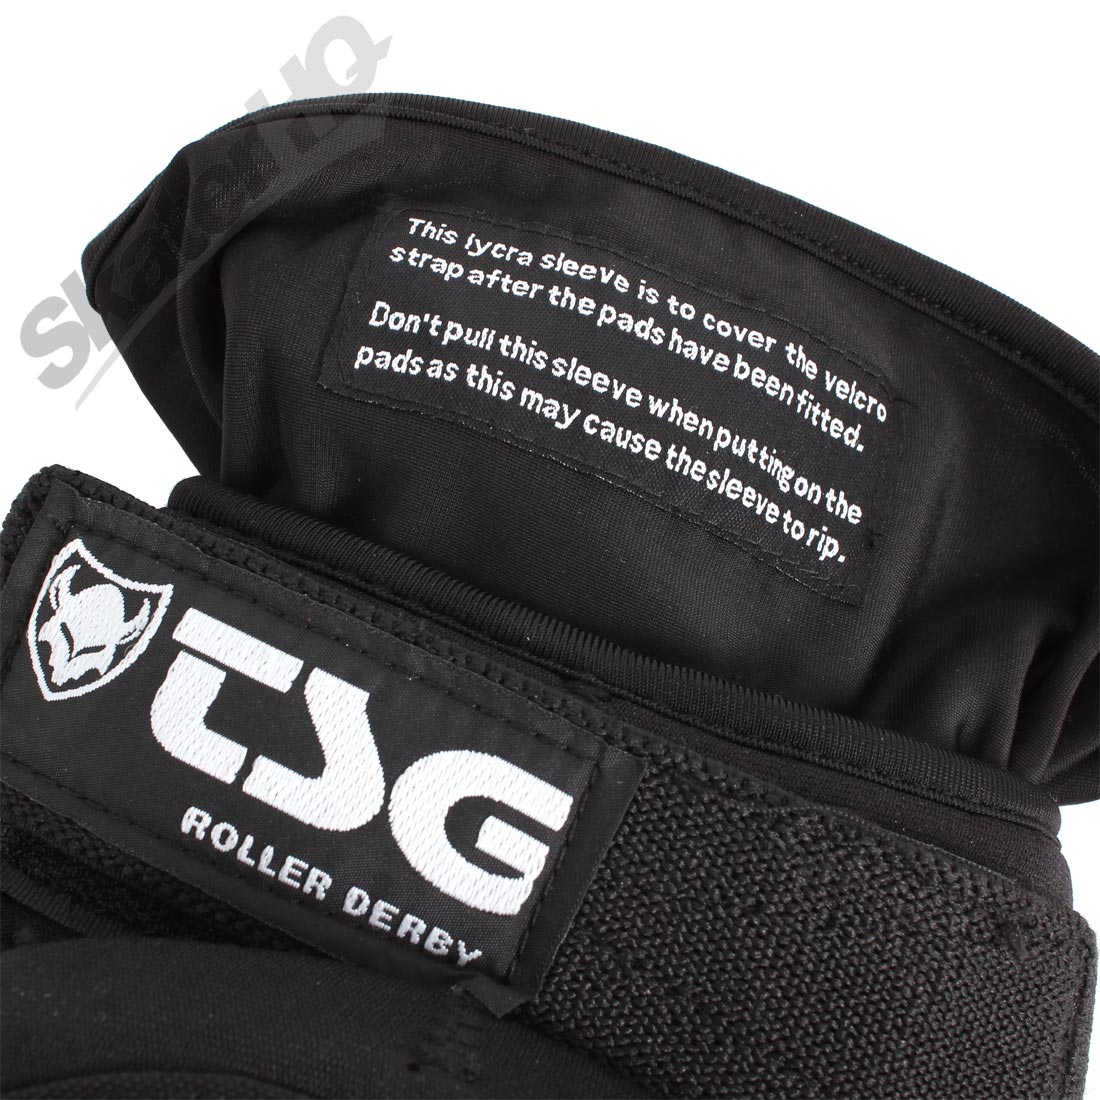 TSG D30 Rollerderby Knee - XLarge Protective Gear